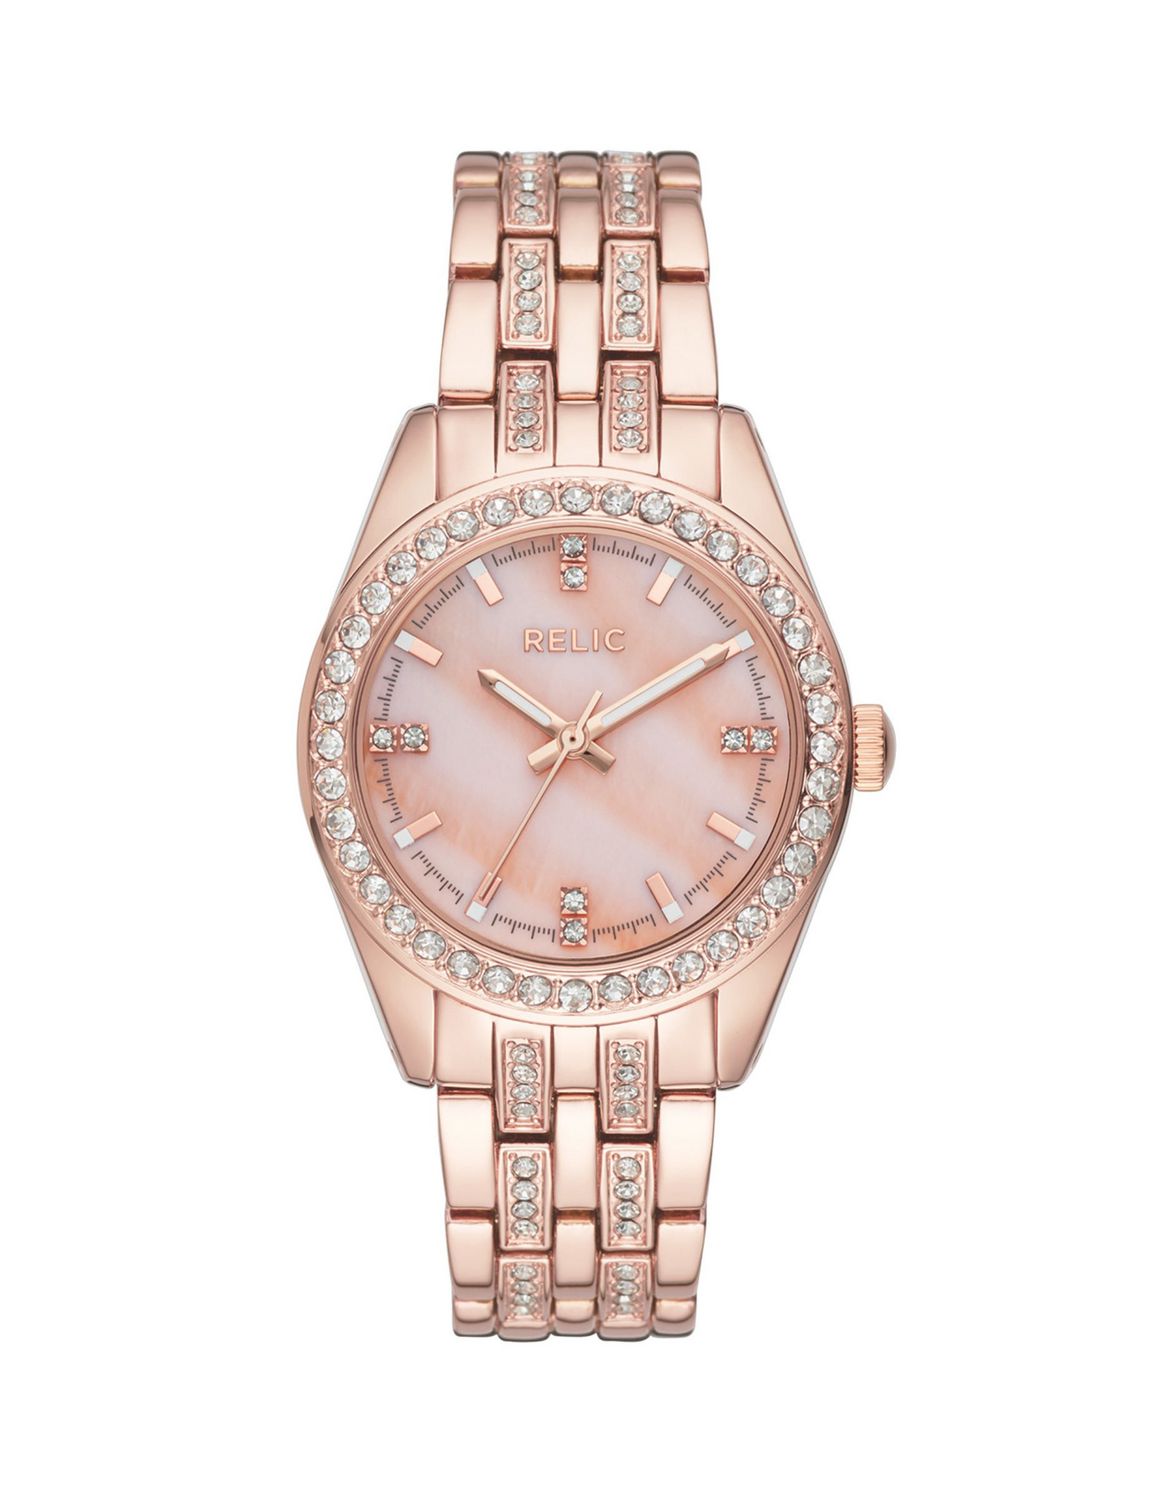 Relic by Fossil Iva Rose Gold-Tone Three-Hand Watch | Walmart Canada